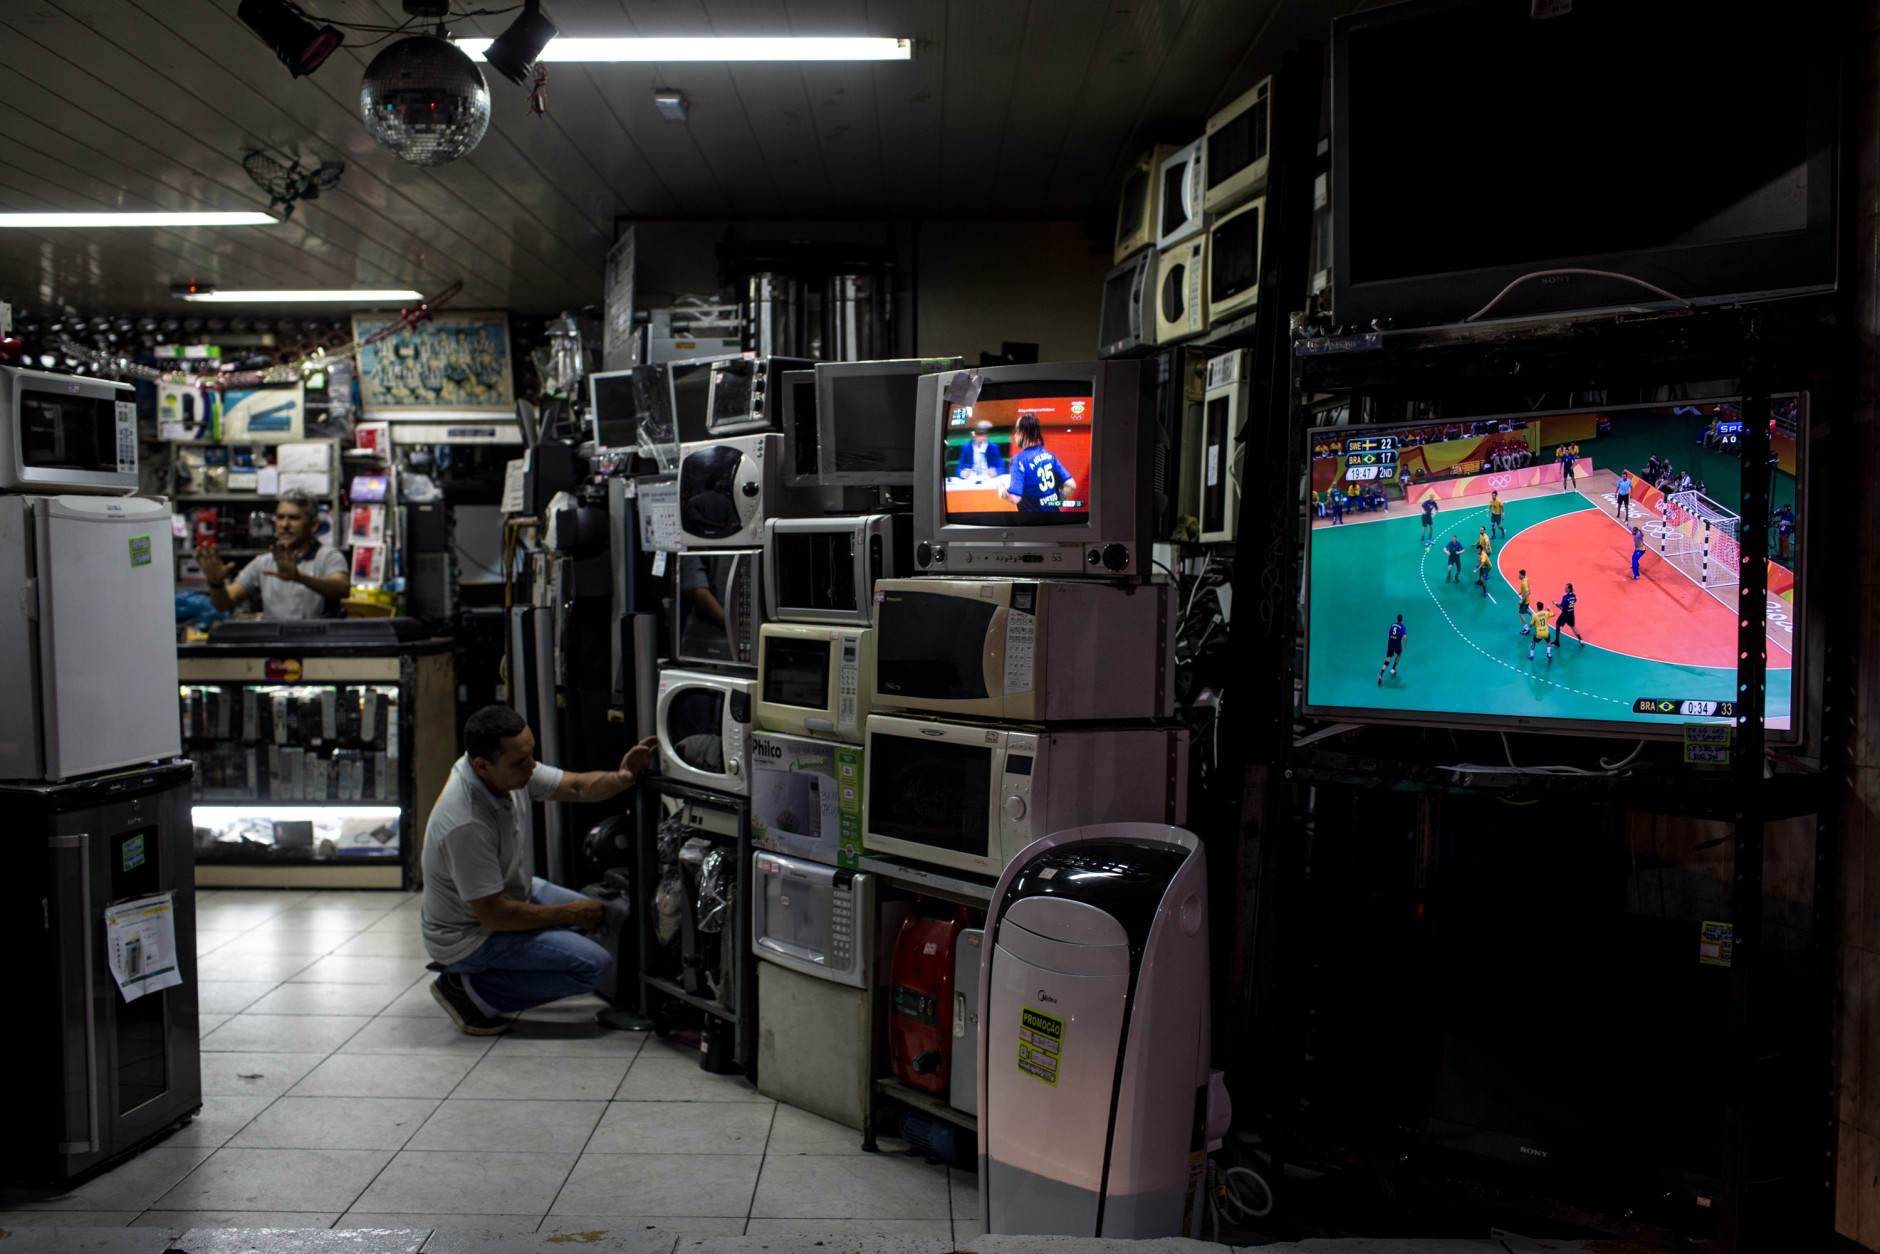 RIO DE JANEIRO, BRAZIL - AUGUST 15:  A man works at an electronics store as the Olympic games is shown on tv screens on August 15, 2016 in Rio de Janeiro, Brazil.  Brazil is currently hosting the 2016 Summer Olympic games despite the dismissal of President Dilma Rousseff, pollution concerns, ongoing crime problems and a failing economy. Around 1.4 million residents, or approximately 22 percent of Rio's population, reside in favelas which often lack proper sanitation, health care, education and security, for many of these residents watching the Olympic games on tv is their only access to the event.  (Photo by Chris McGrath/Getty Images)